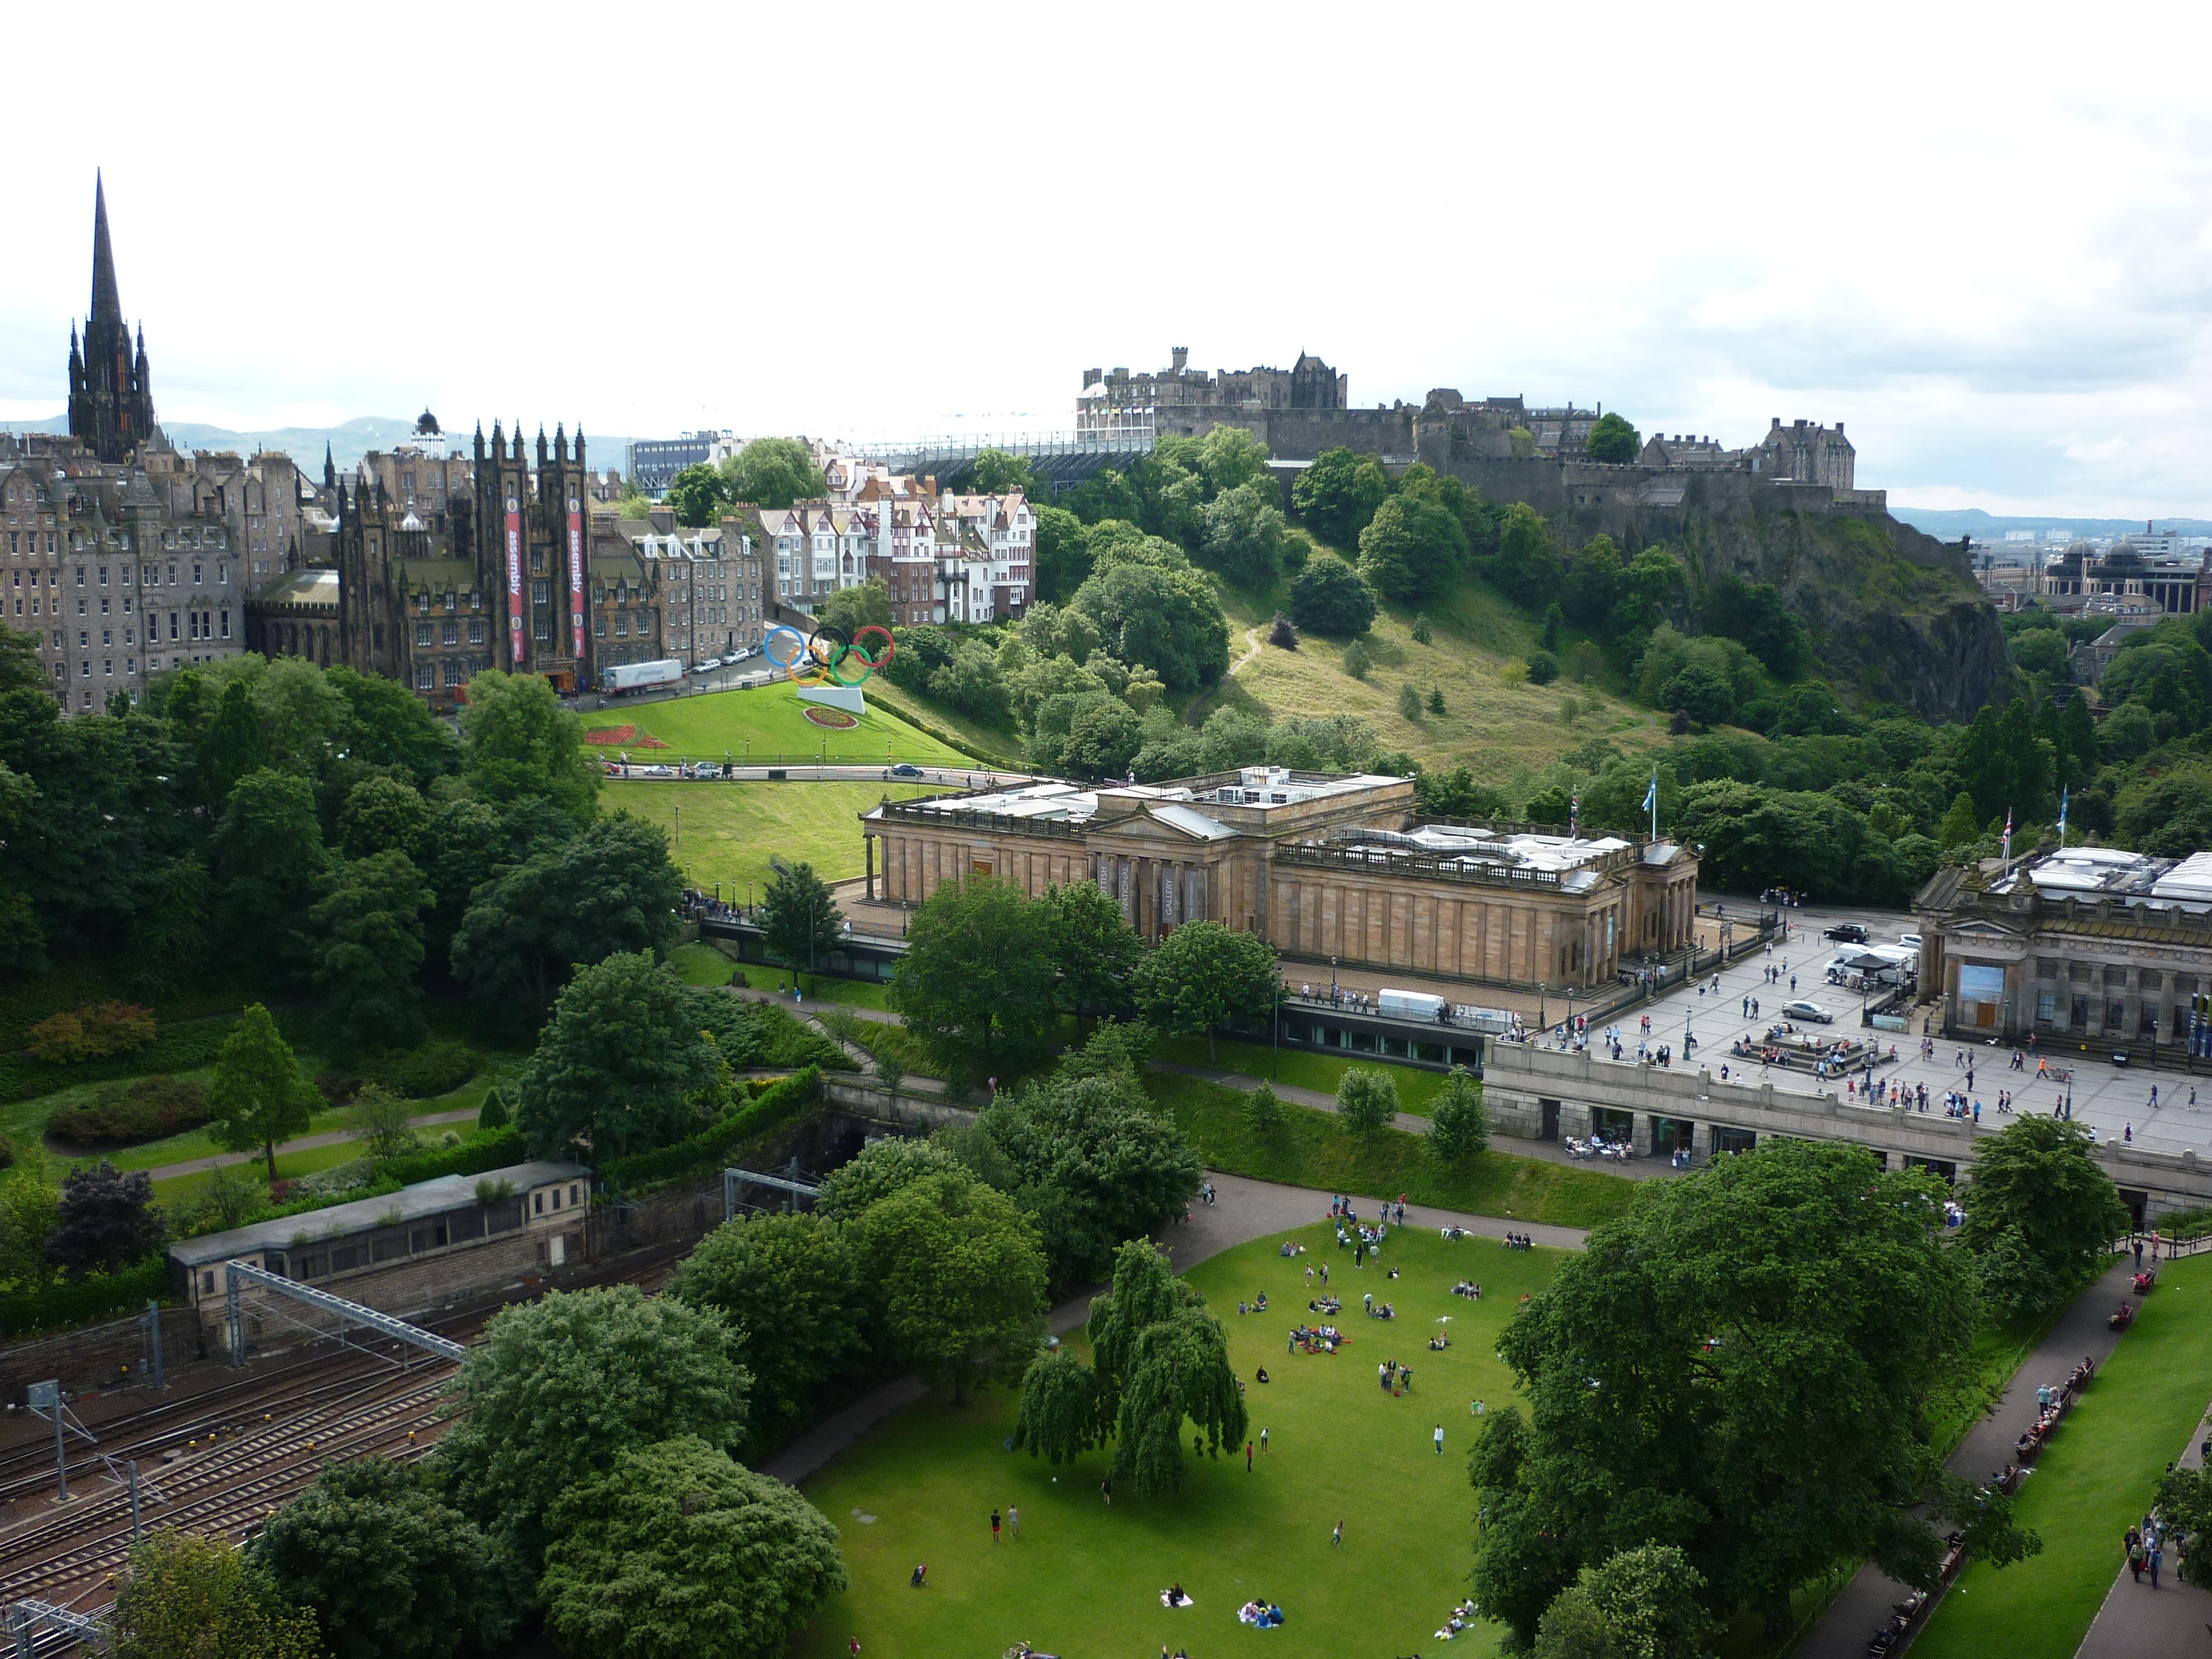 Cover image of this place Princes Street Gardens